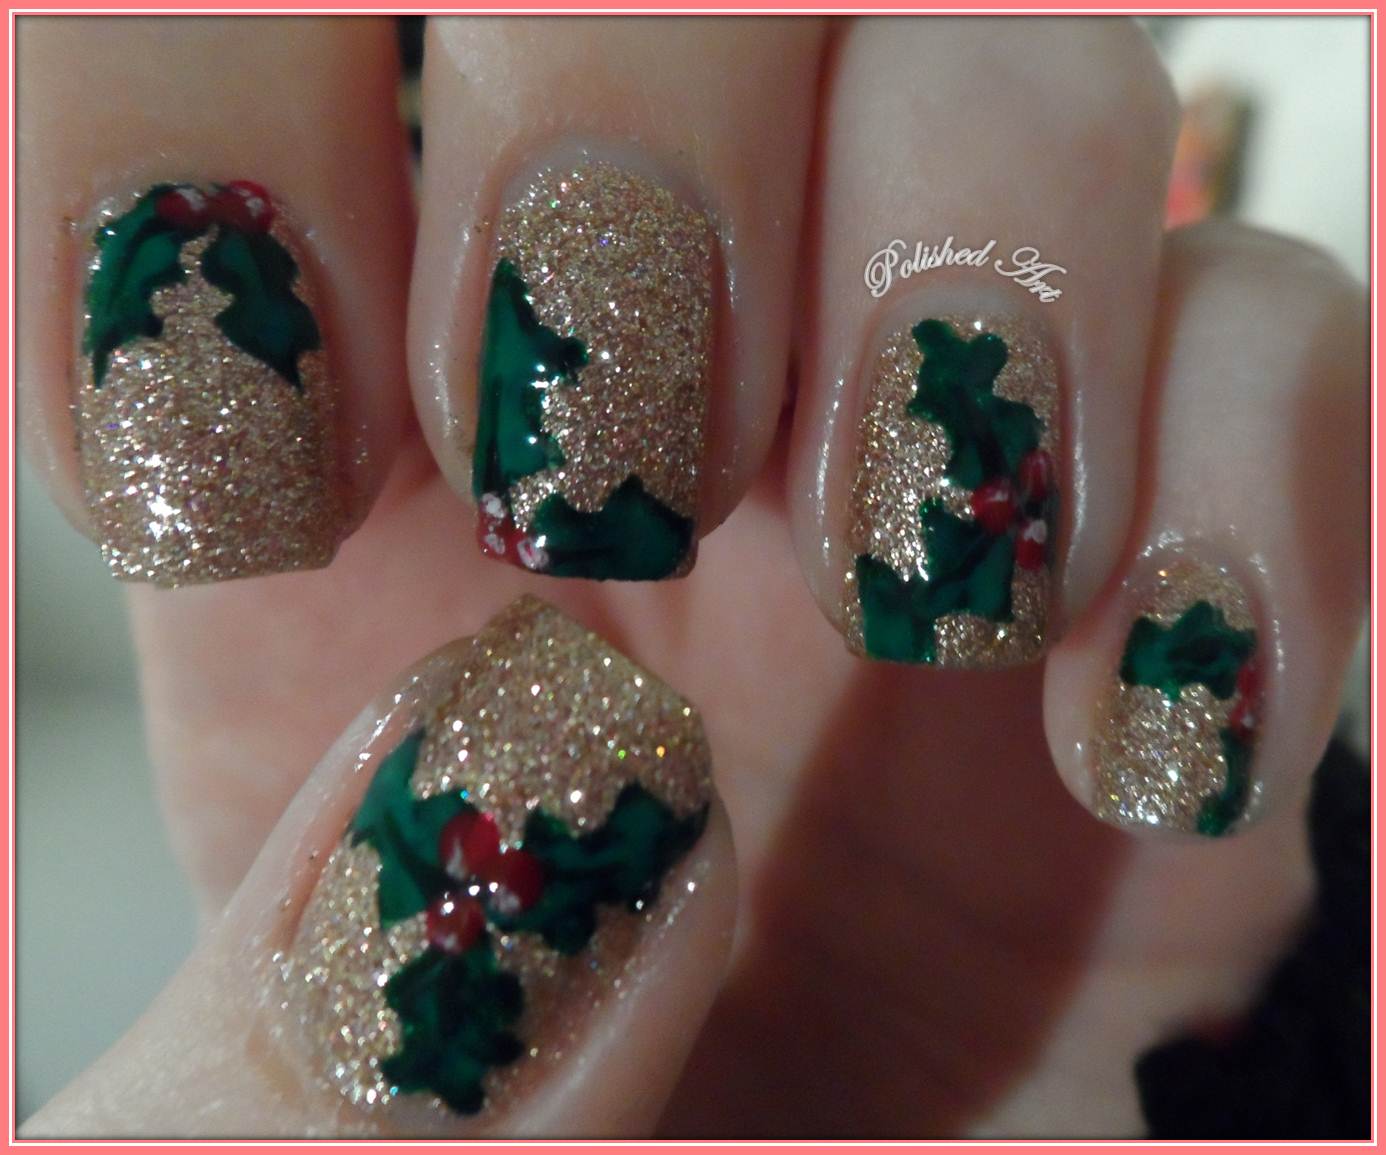 Polished Art: A Holly Jolly Christmas Challenge: Deck the halls!